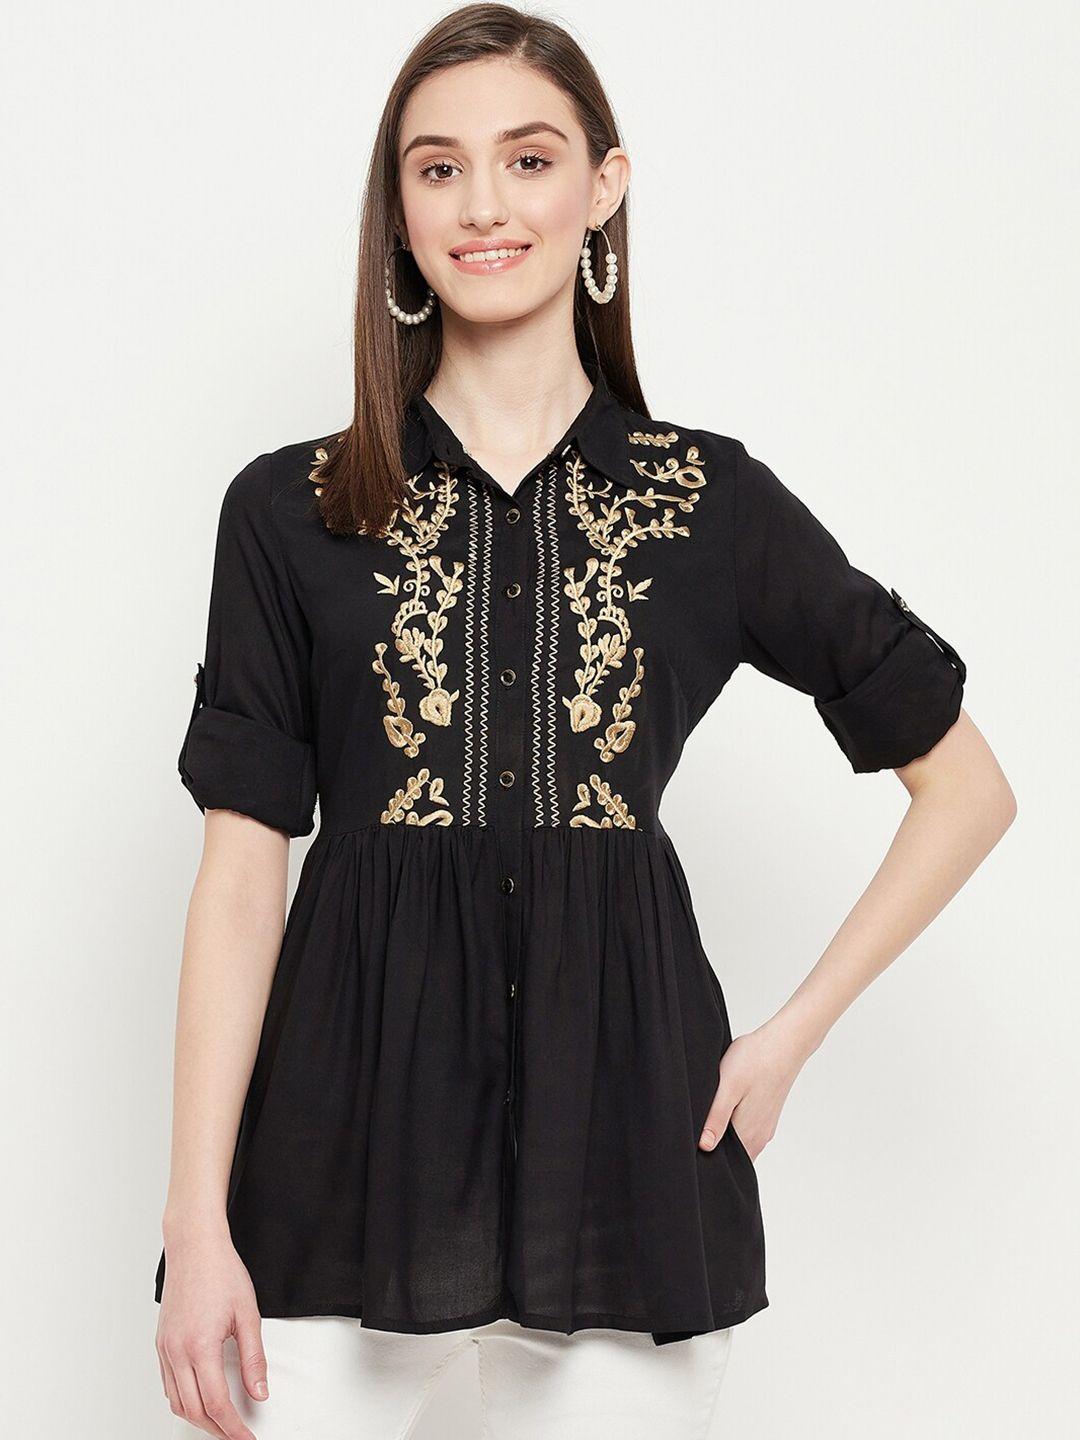 ishin floral embroidered shirt style top